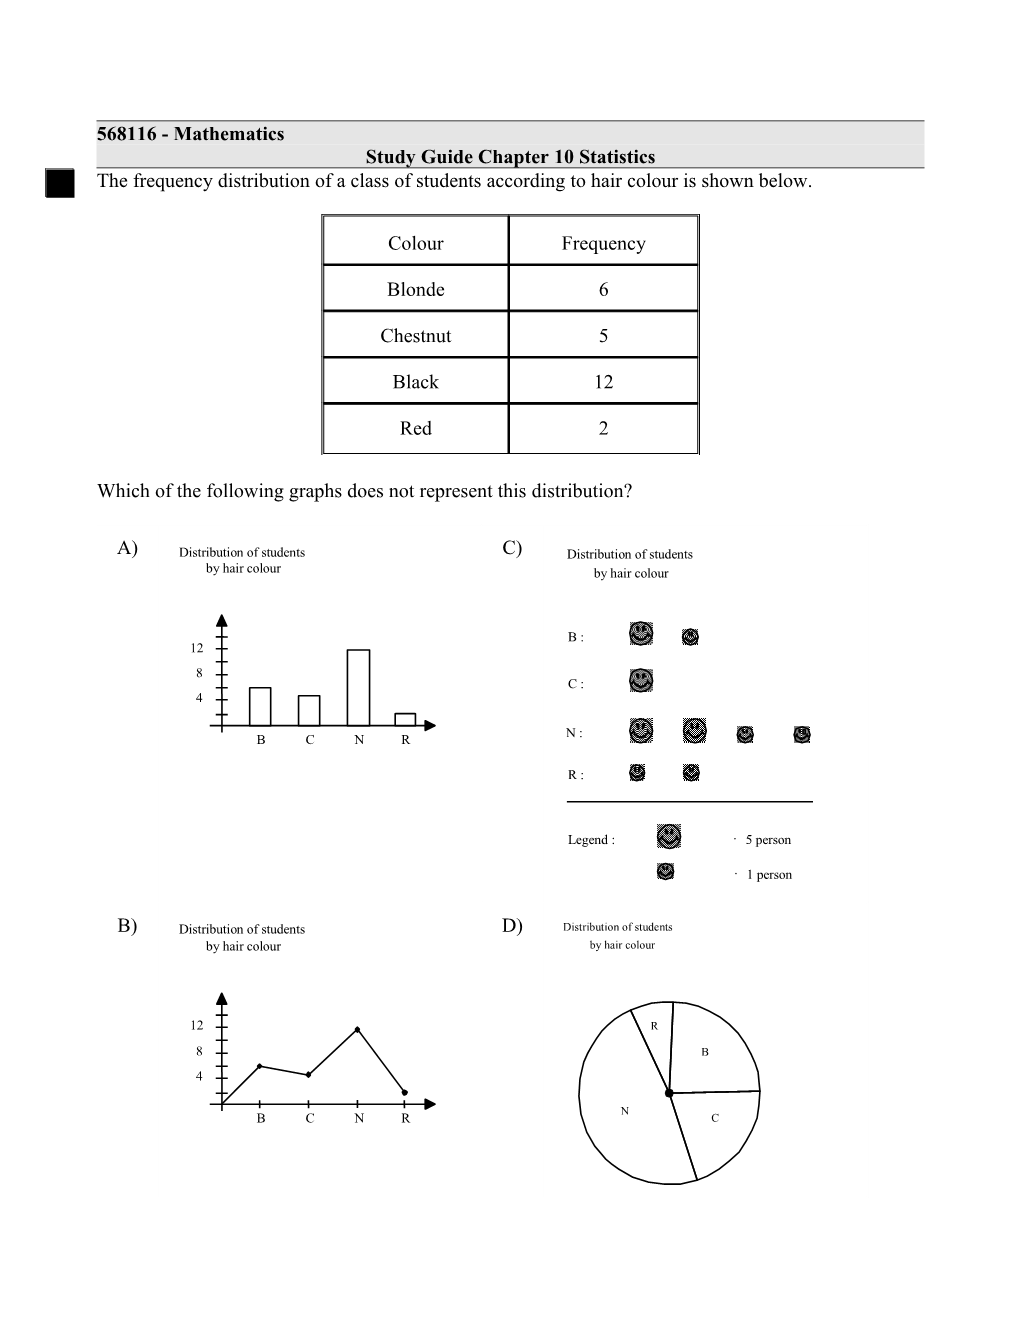 Study Guide Chapter 10 Statistics